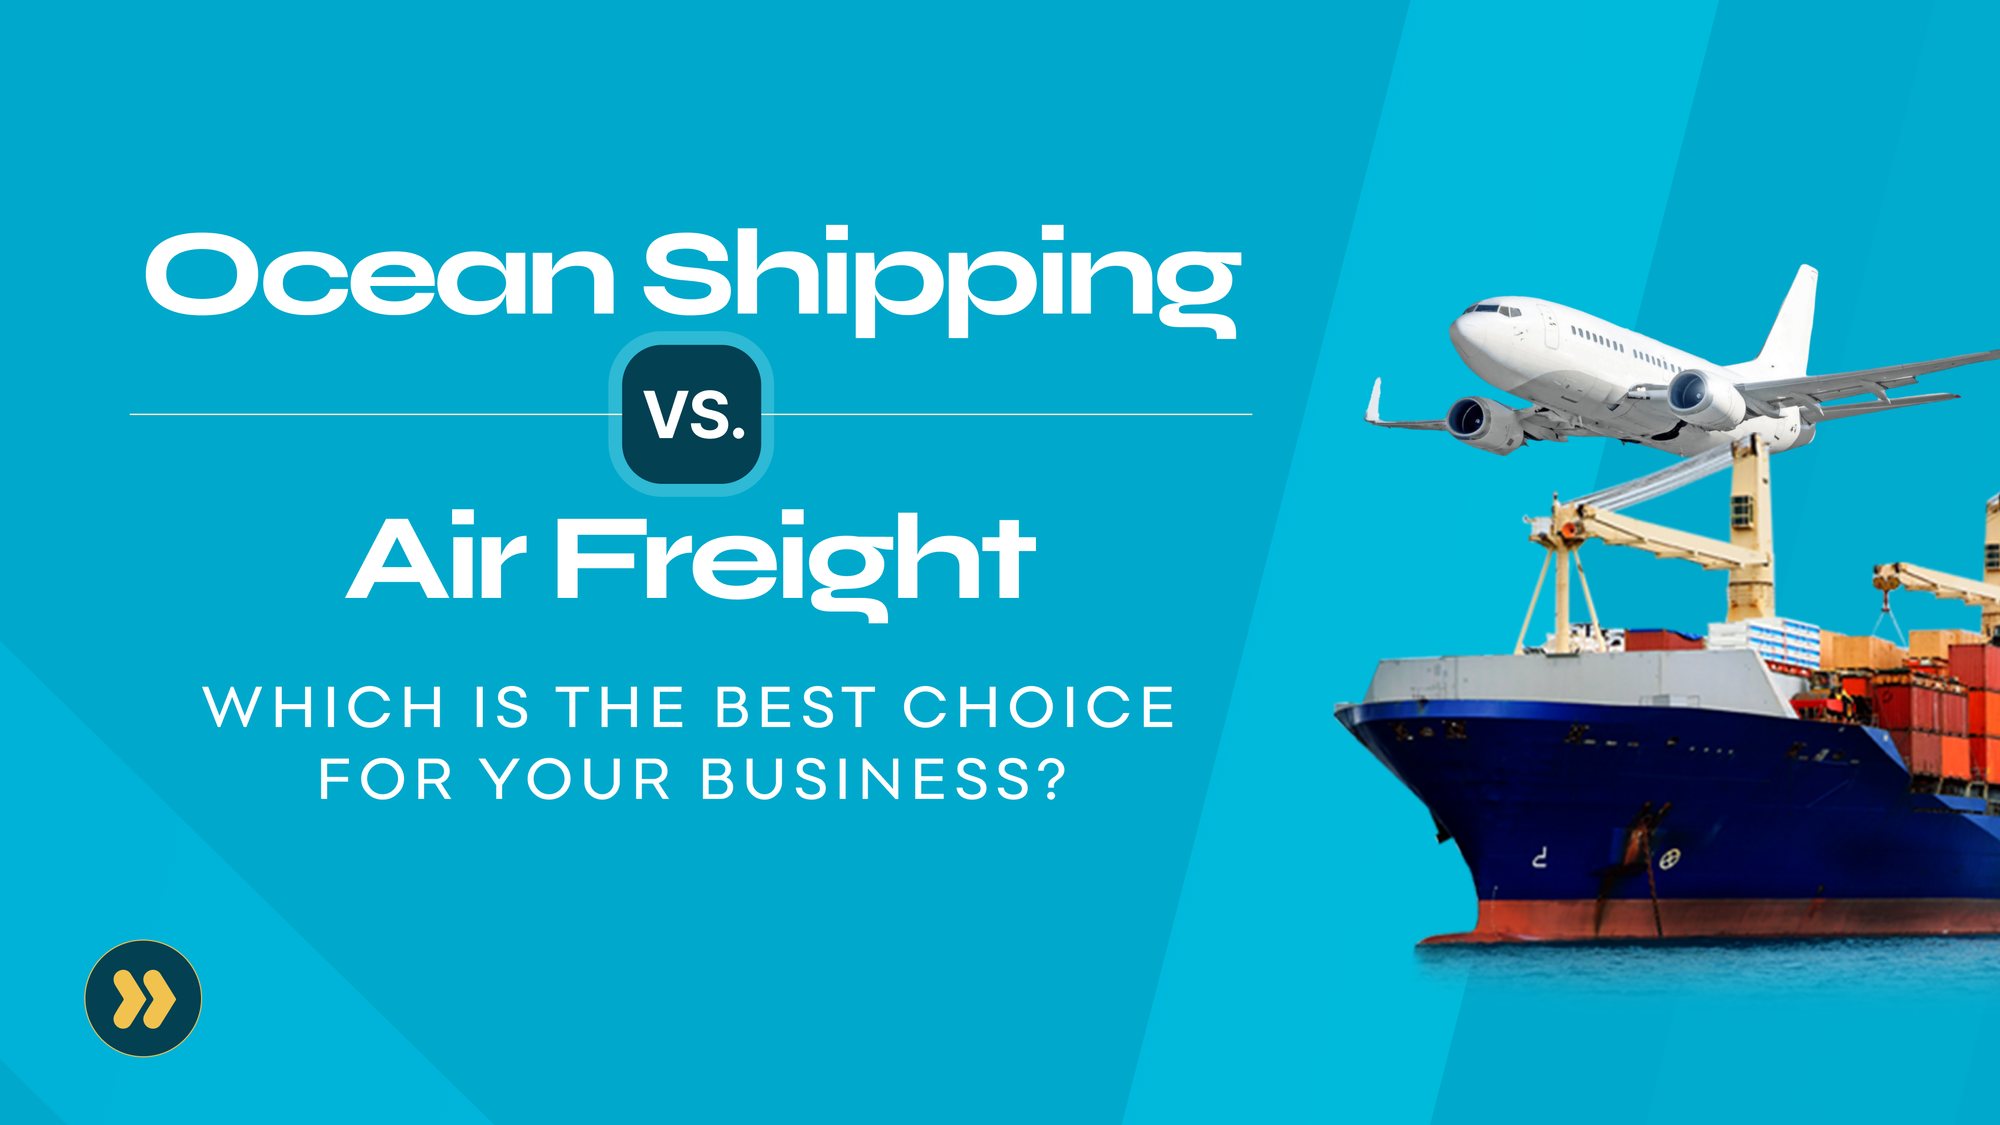 Ocean Shipping vs. Air Freight - Which is the Best Choice for Your Business?